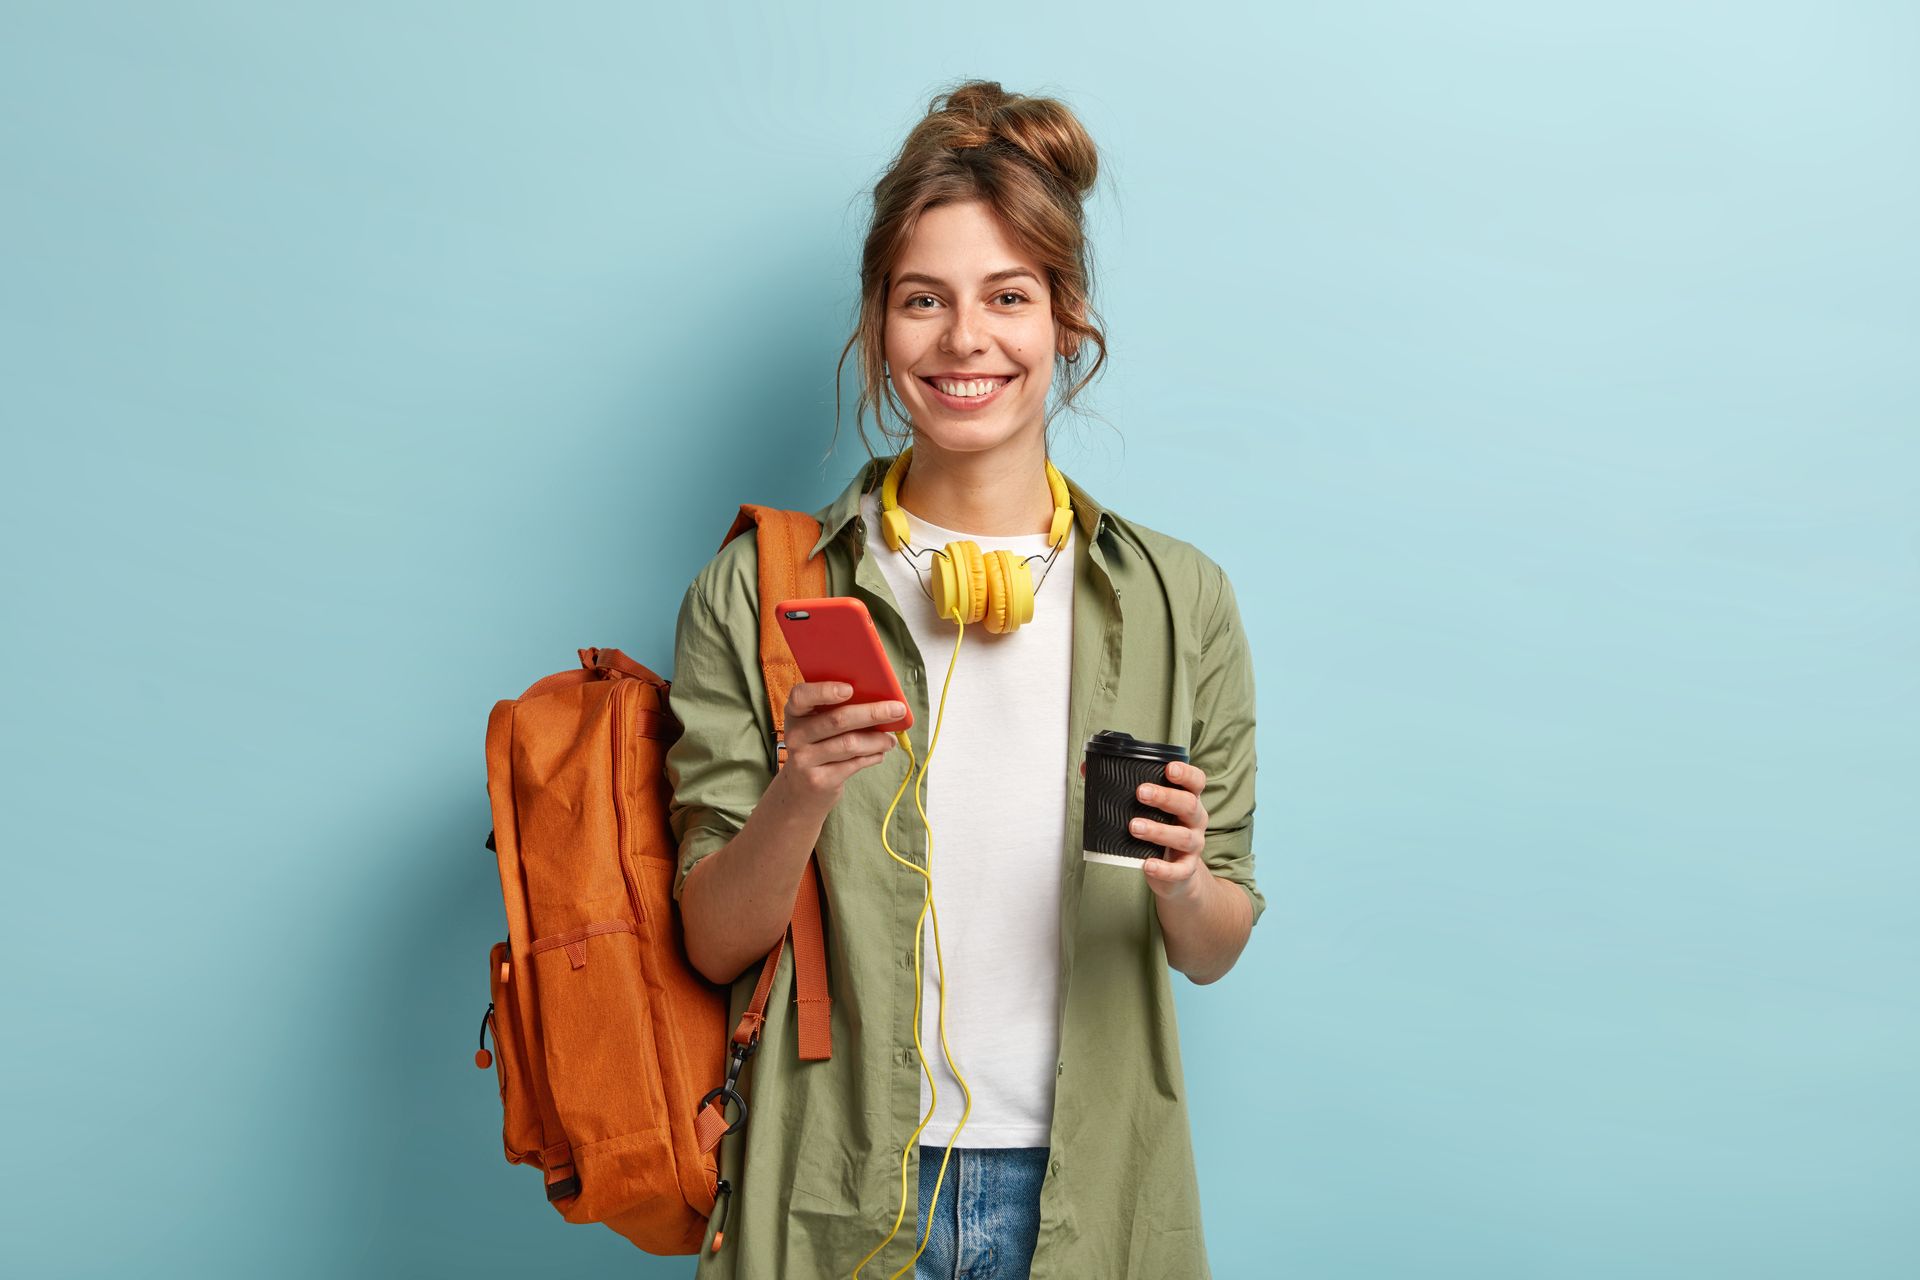 A woman with a backpack is holding a cup of coffee and a cell phone.